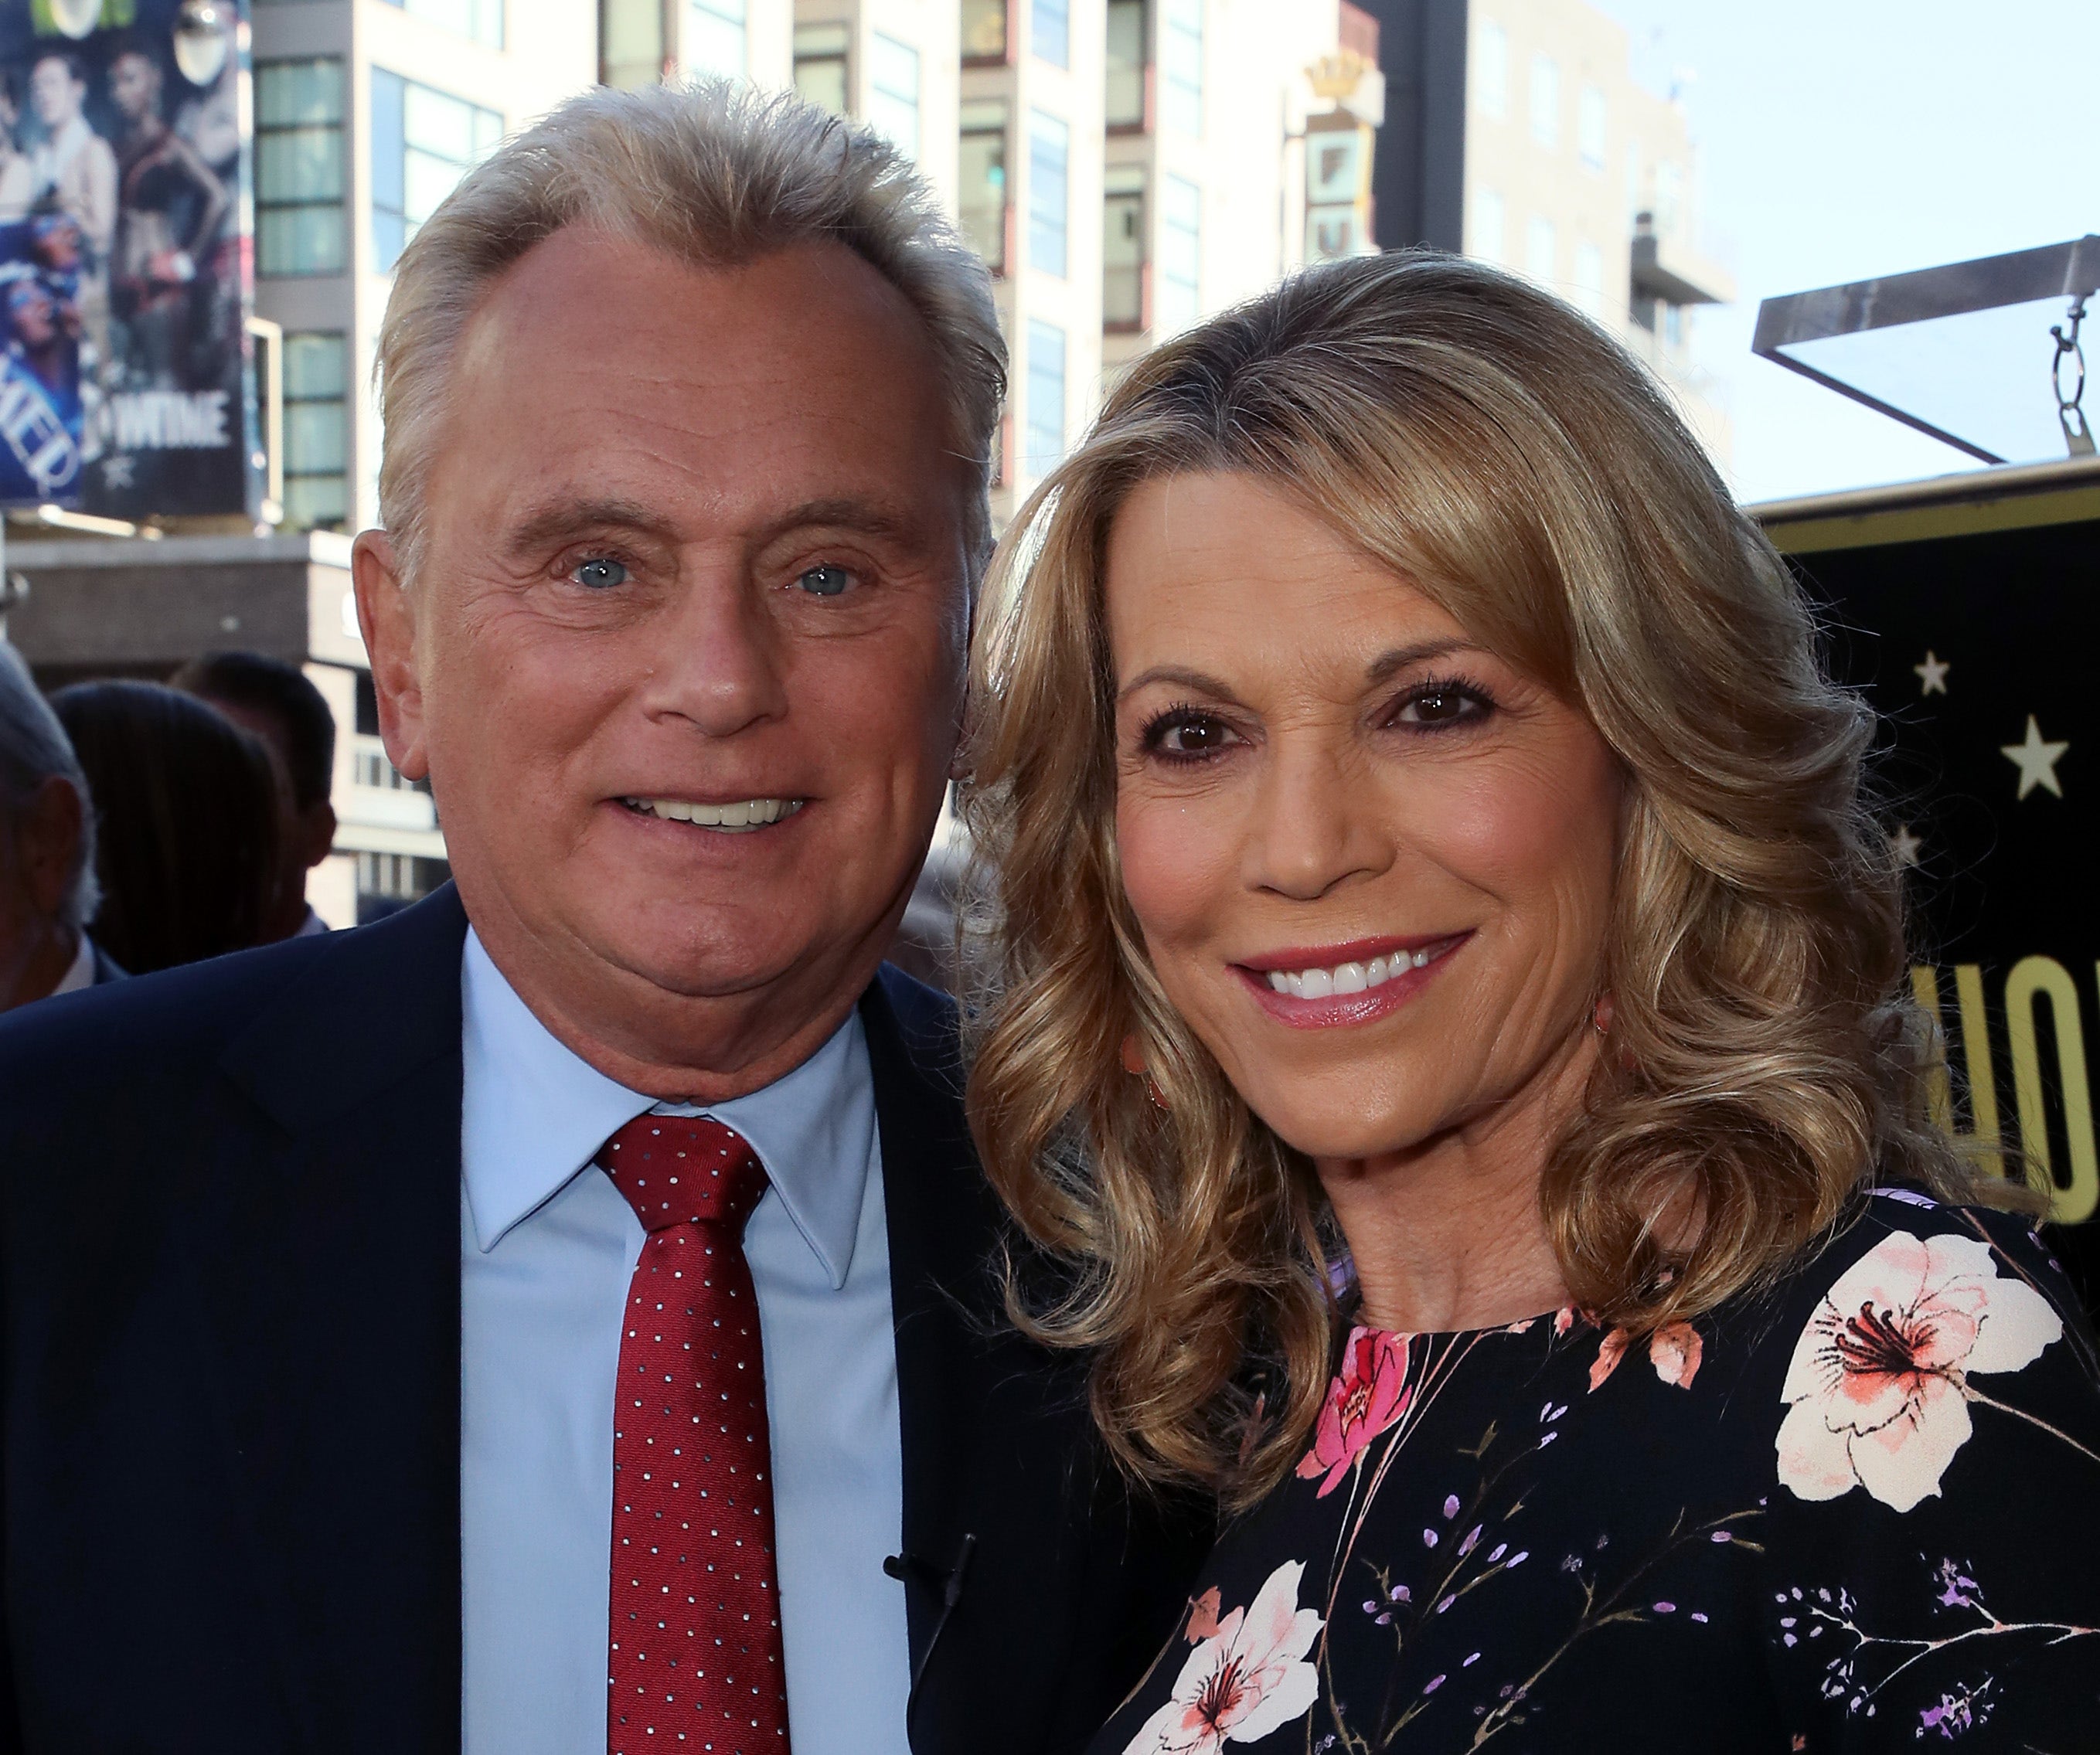 'Wheel of Fortune' host Pat Sajak scolded by Vanna White for cruel prank